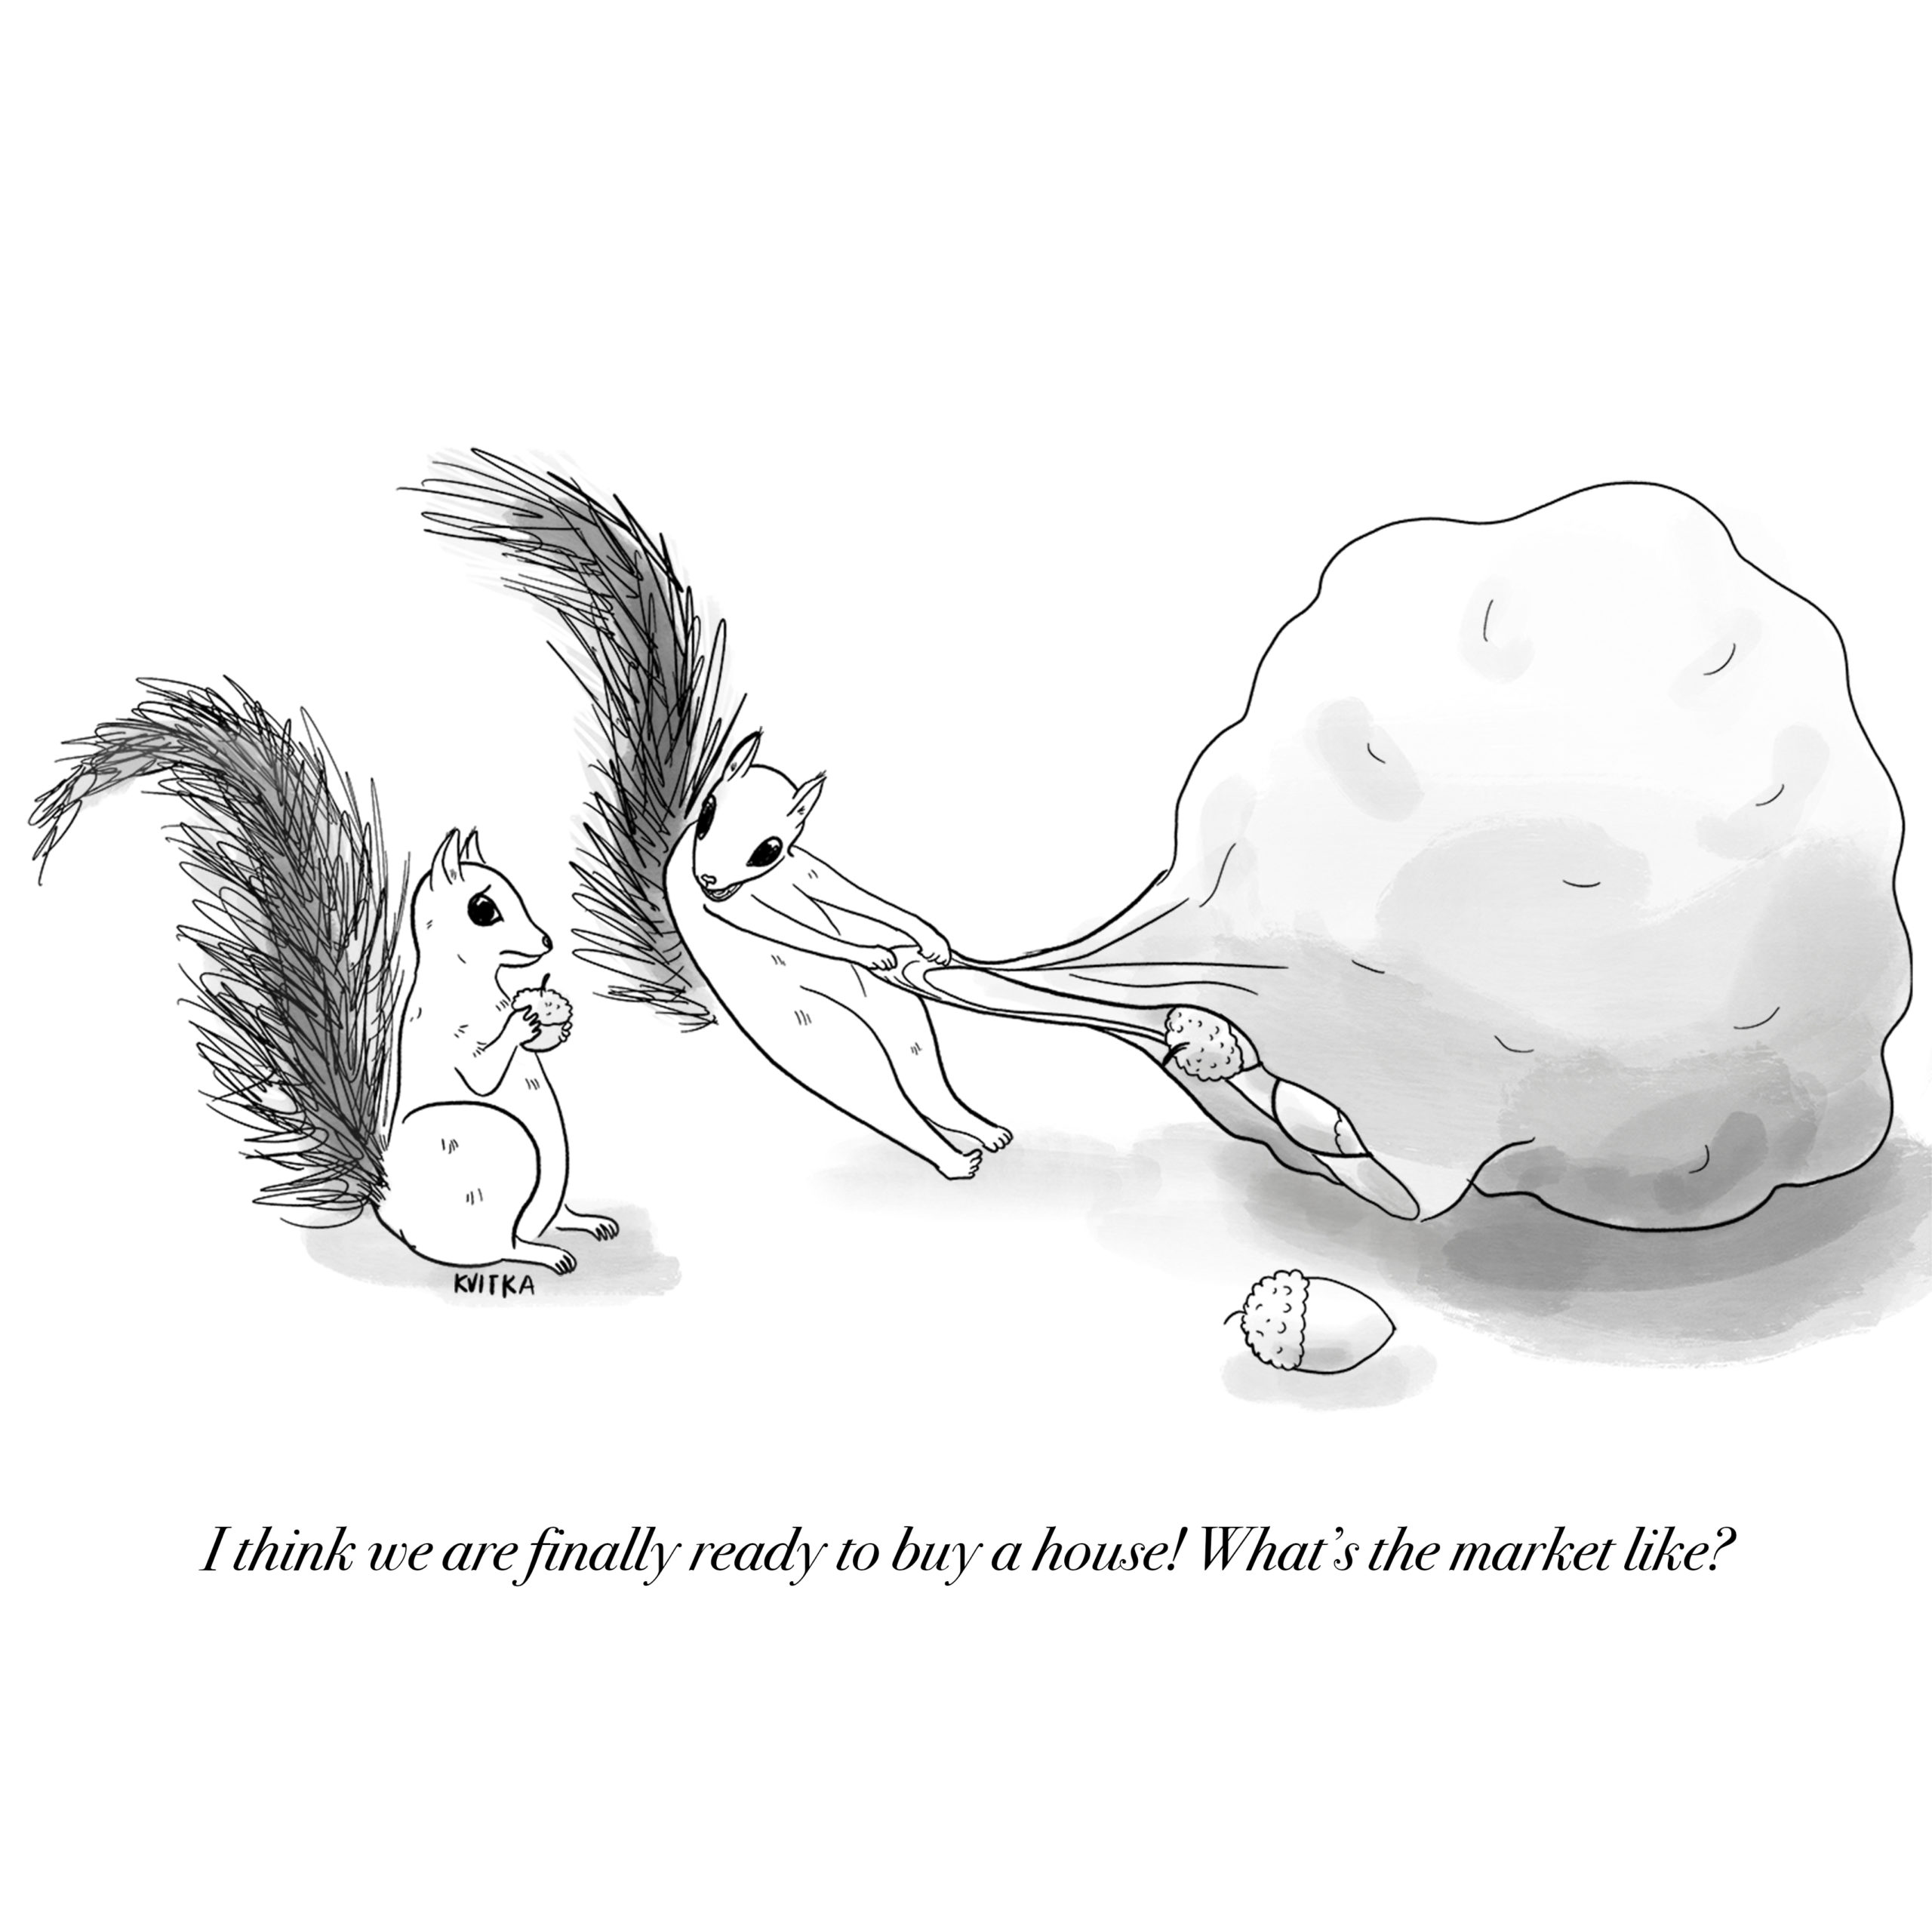 Cartoon of two squirrels on a white background. One is dragging a giant sack of acorns and says to the other, "I think we are finally ready to buy a house, what's the market like?"